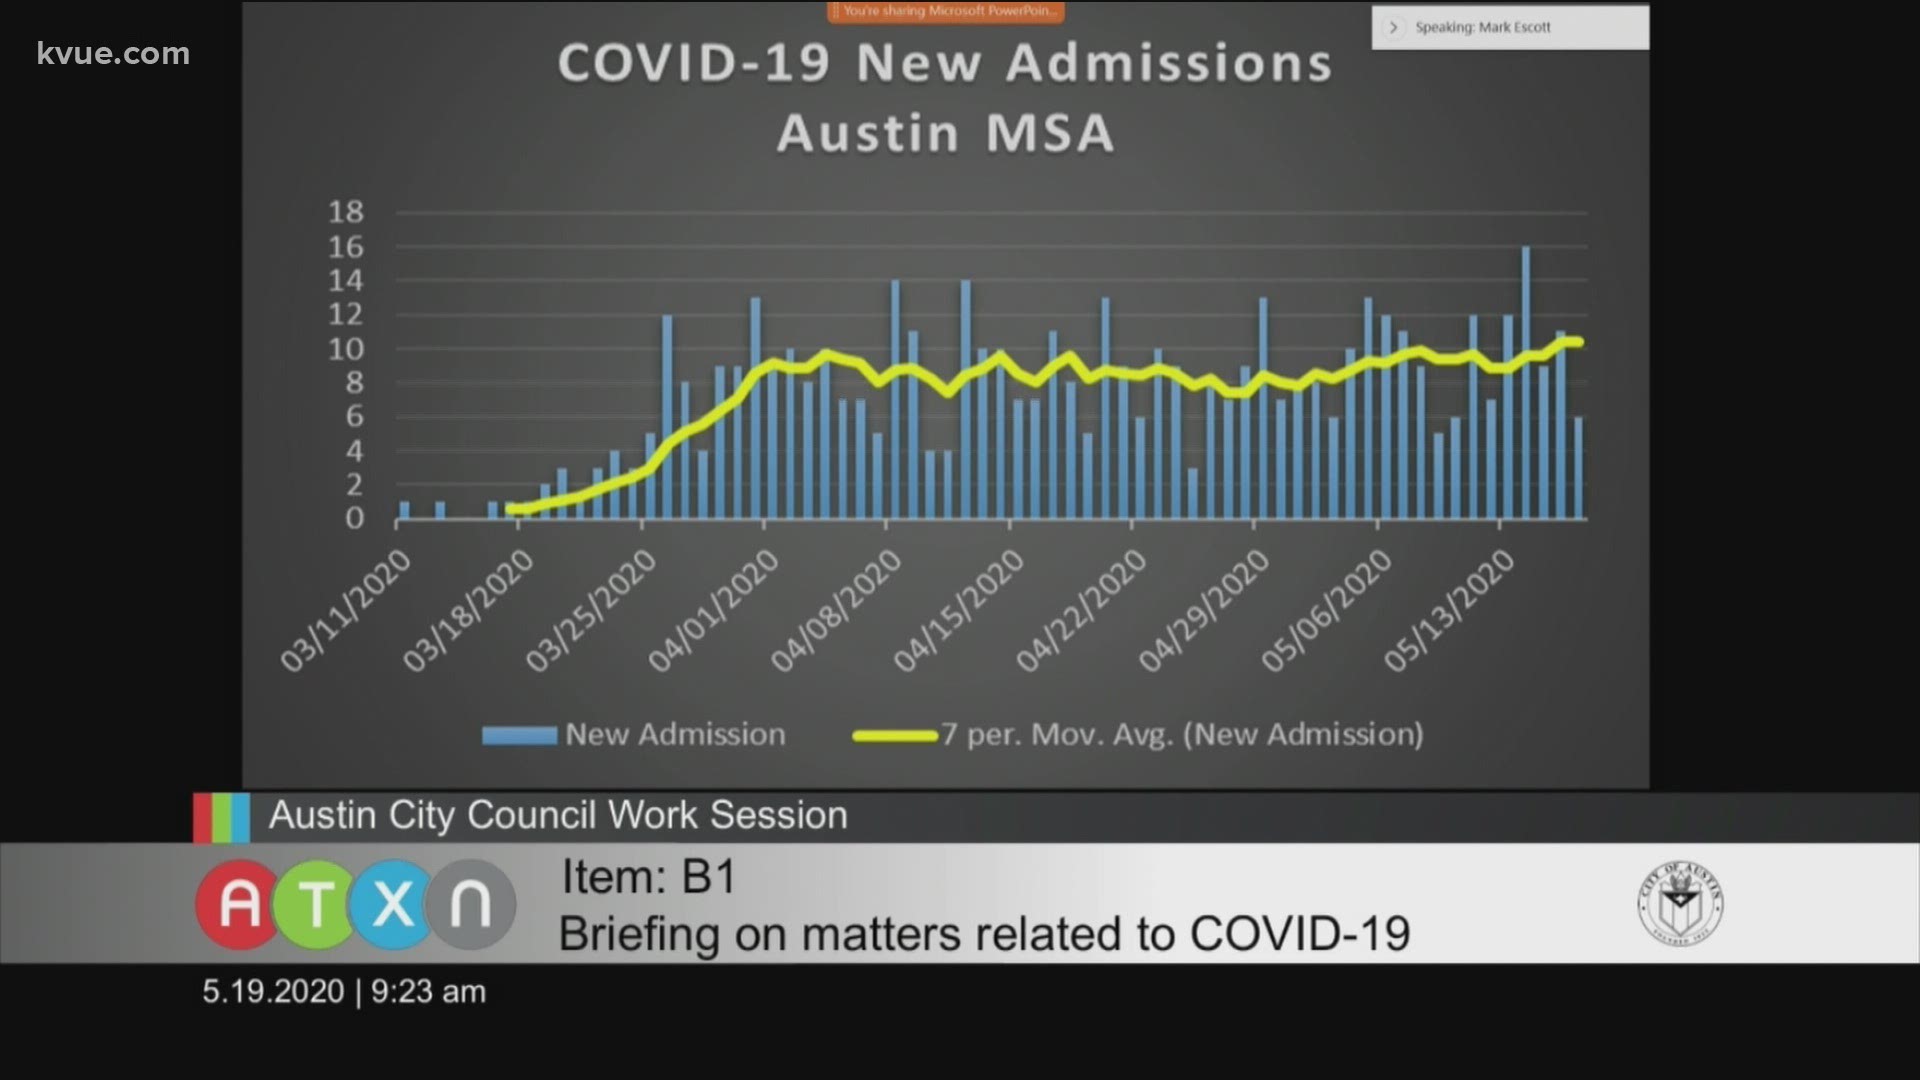 The head health authority for Austin-Travis County said we have effectively flattened the curve in the number of COVID-19 cases.